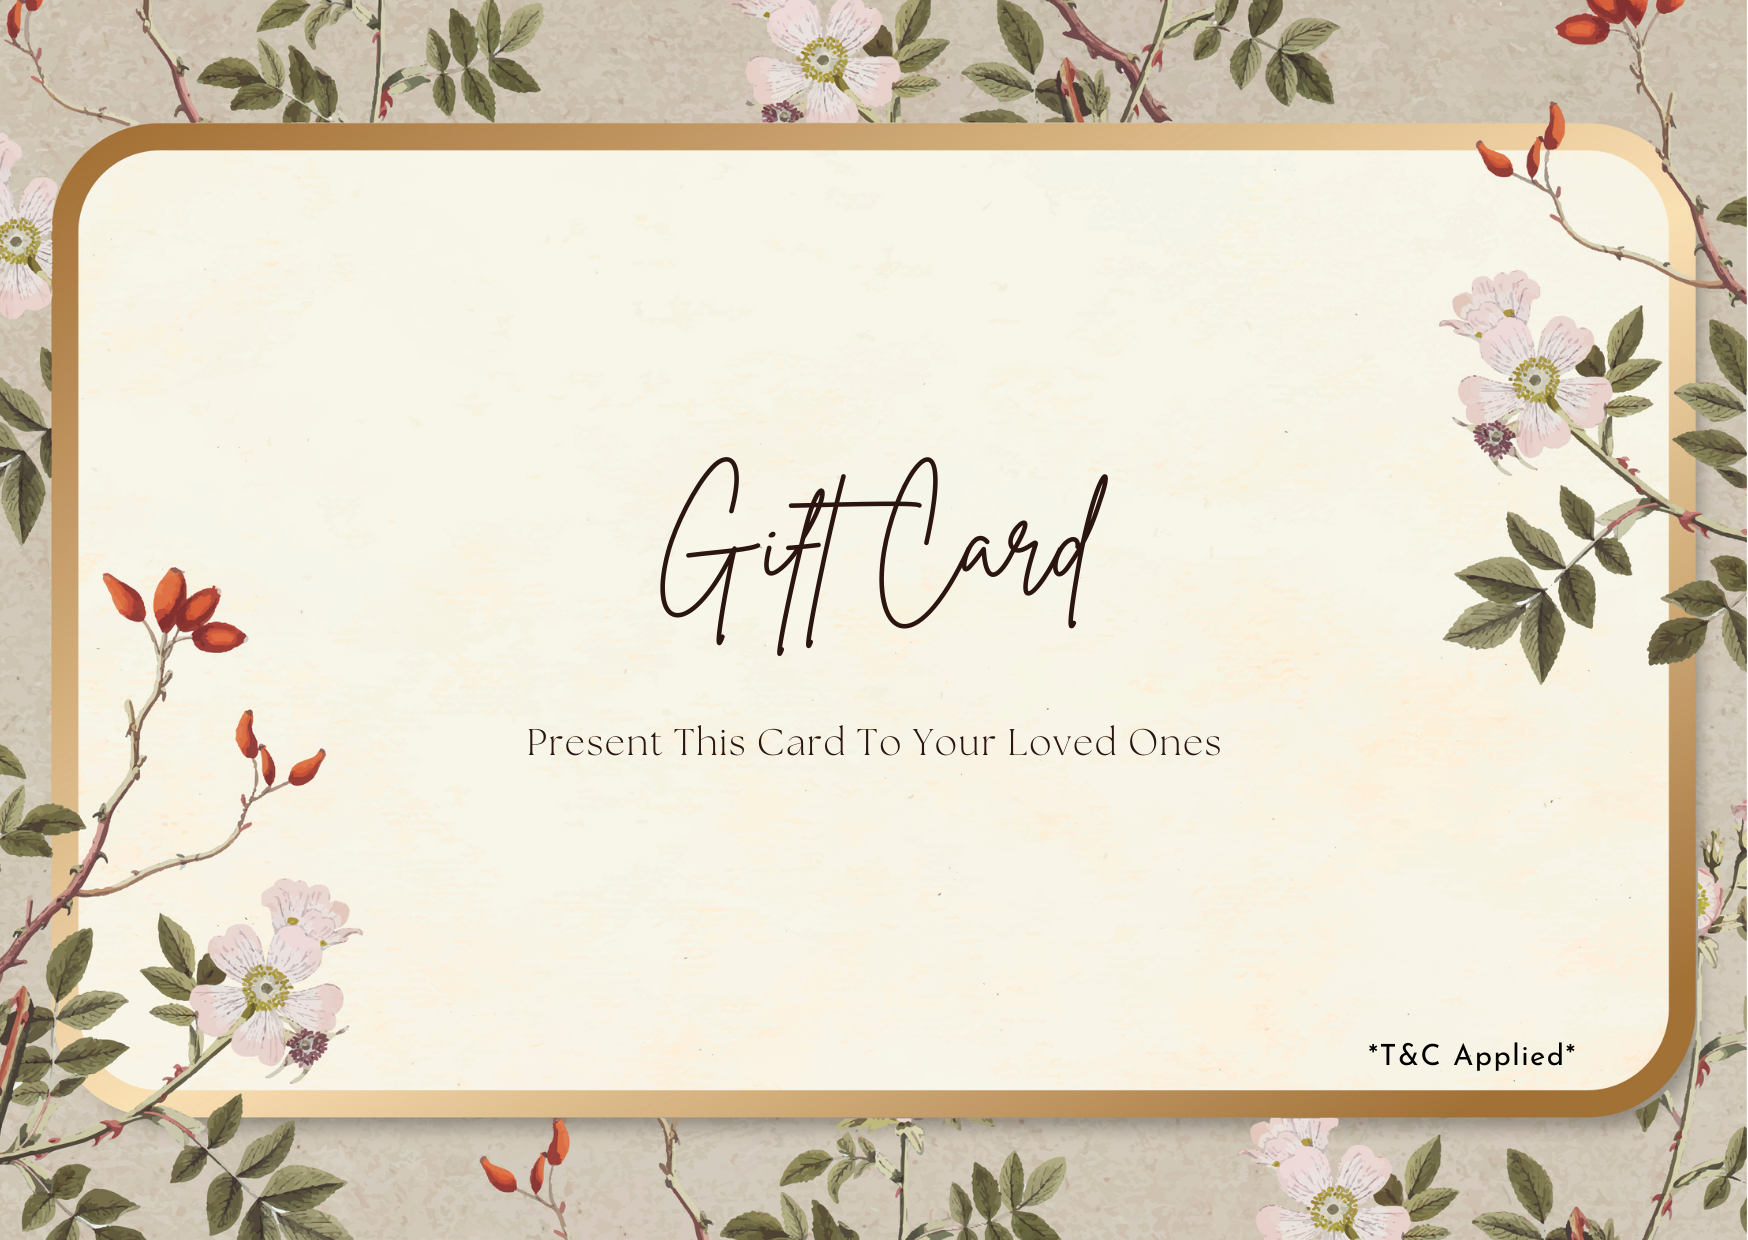 Gift Card For Your Loved One's